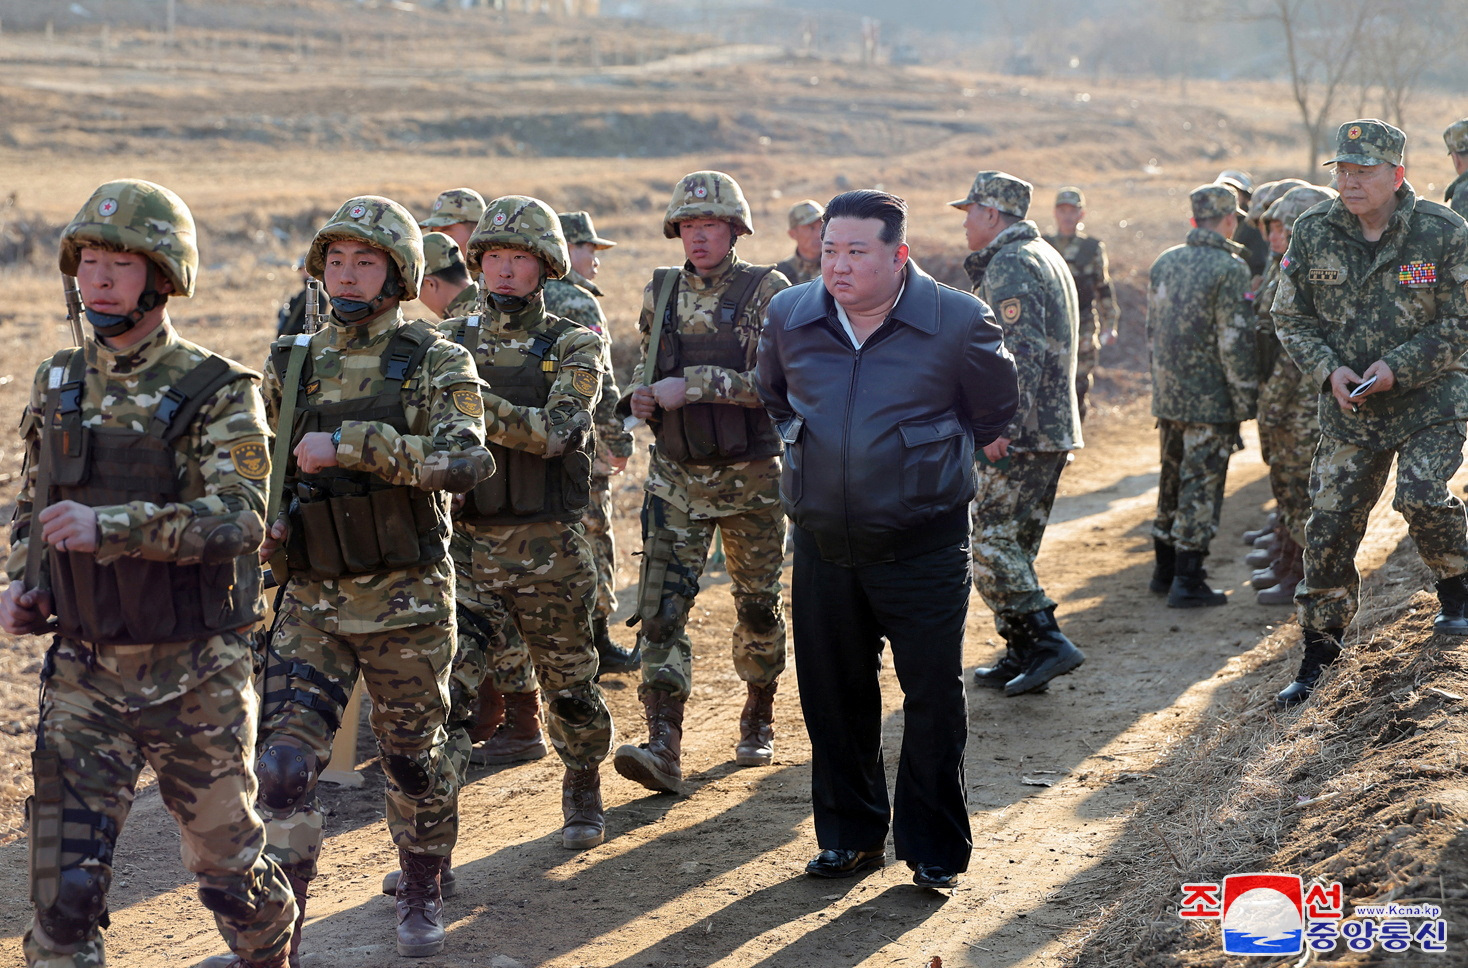 I Think We Need To Talk About Kim Jong Un's Pants Because They Are Amazing